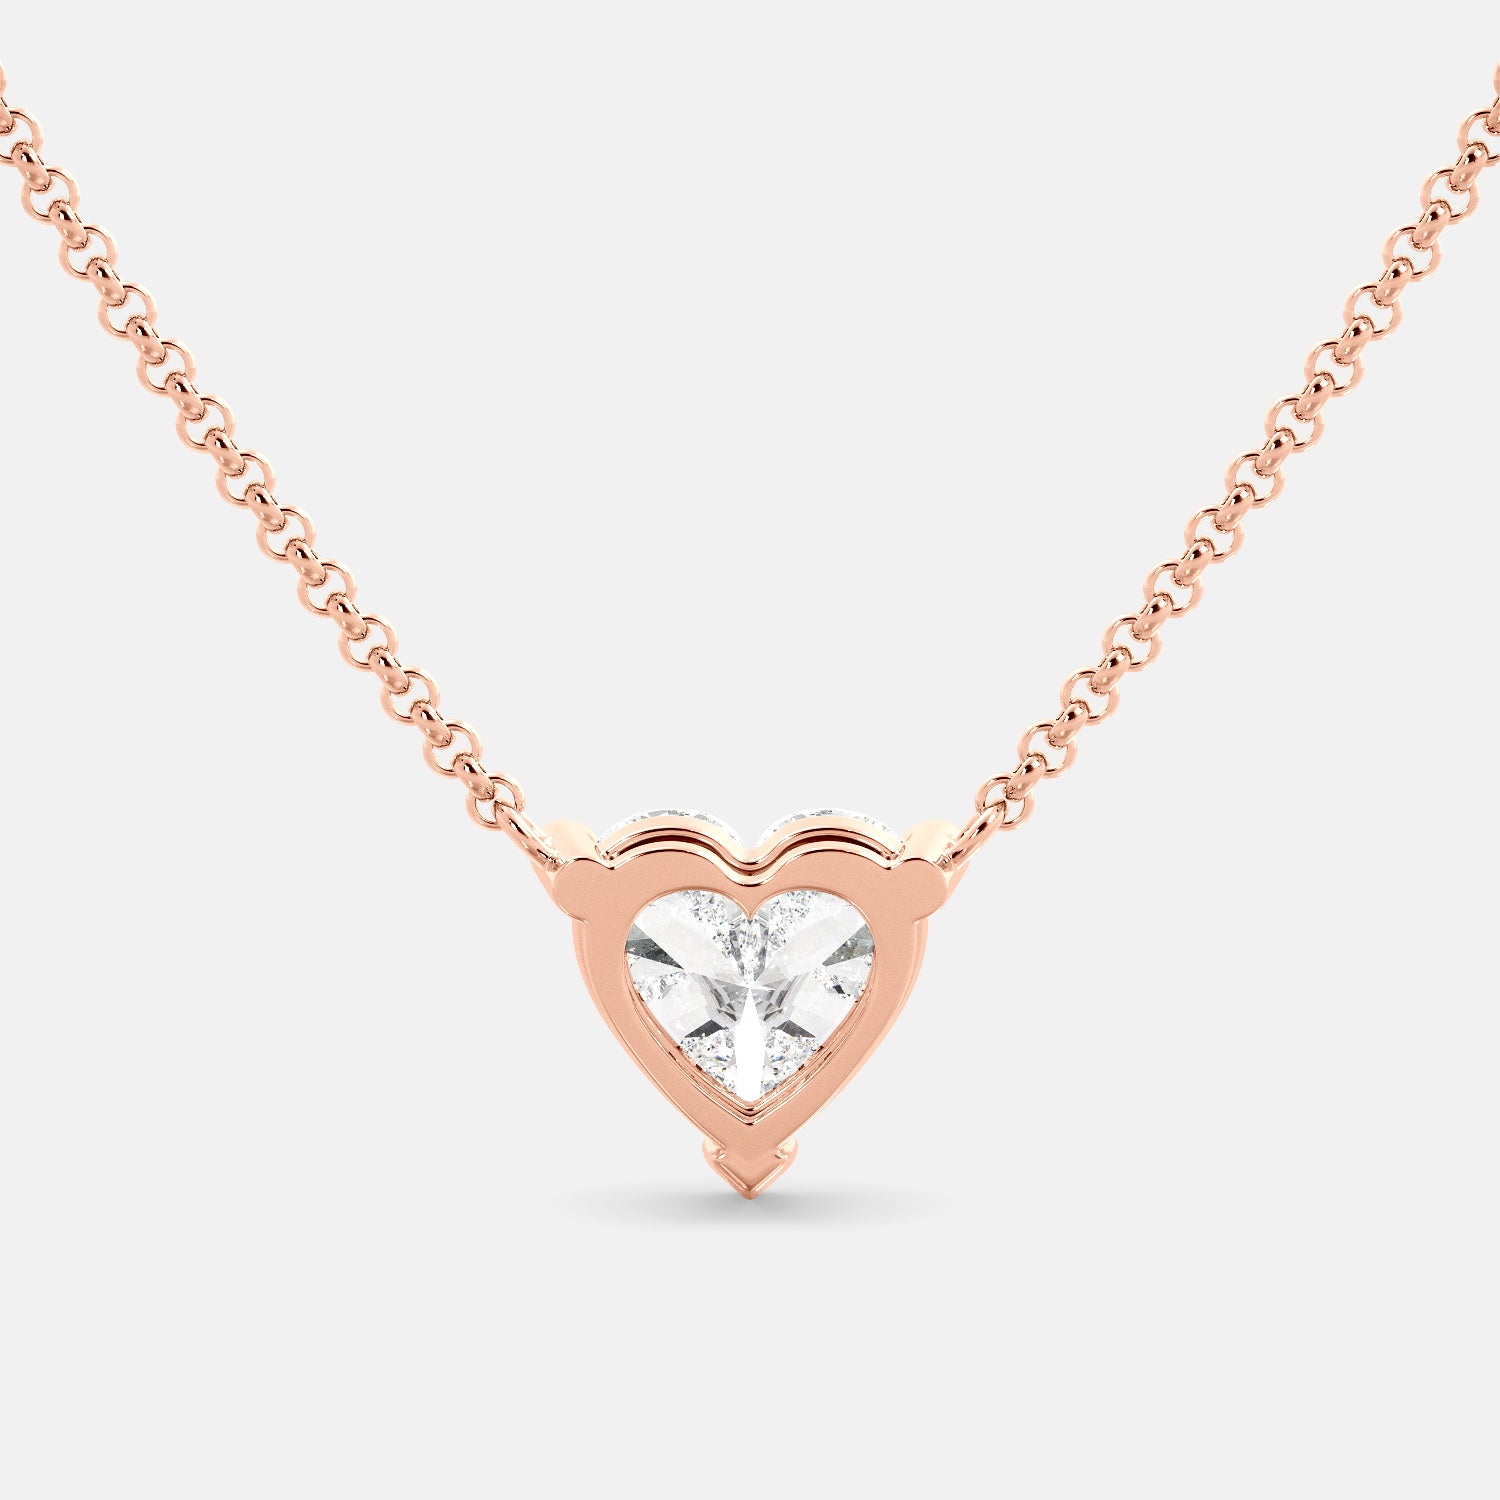 Rose Gold Diamond Necklace With Thin Chain /trio Dainty Diamond Necklace in  14k Rose Gold in Bezel Setting - Etsy